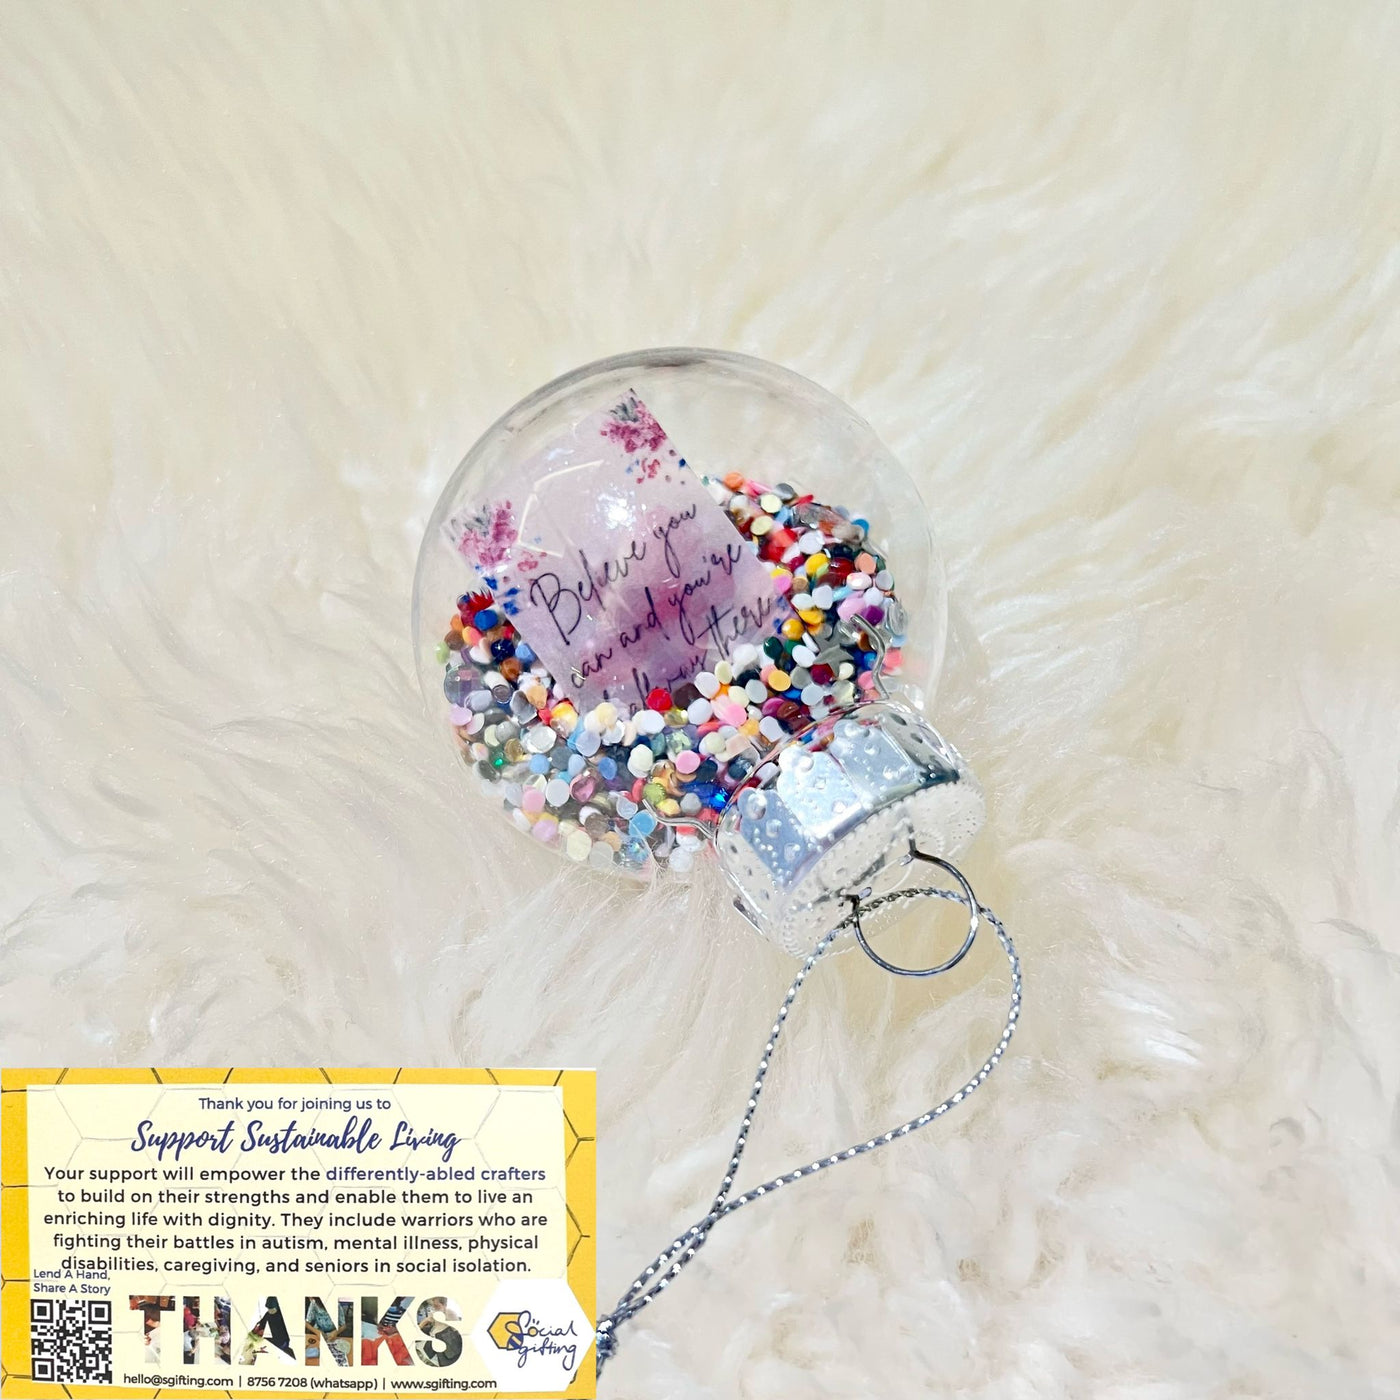 Transparent Christmas Bauble with Motivational Message